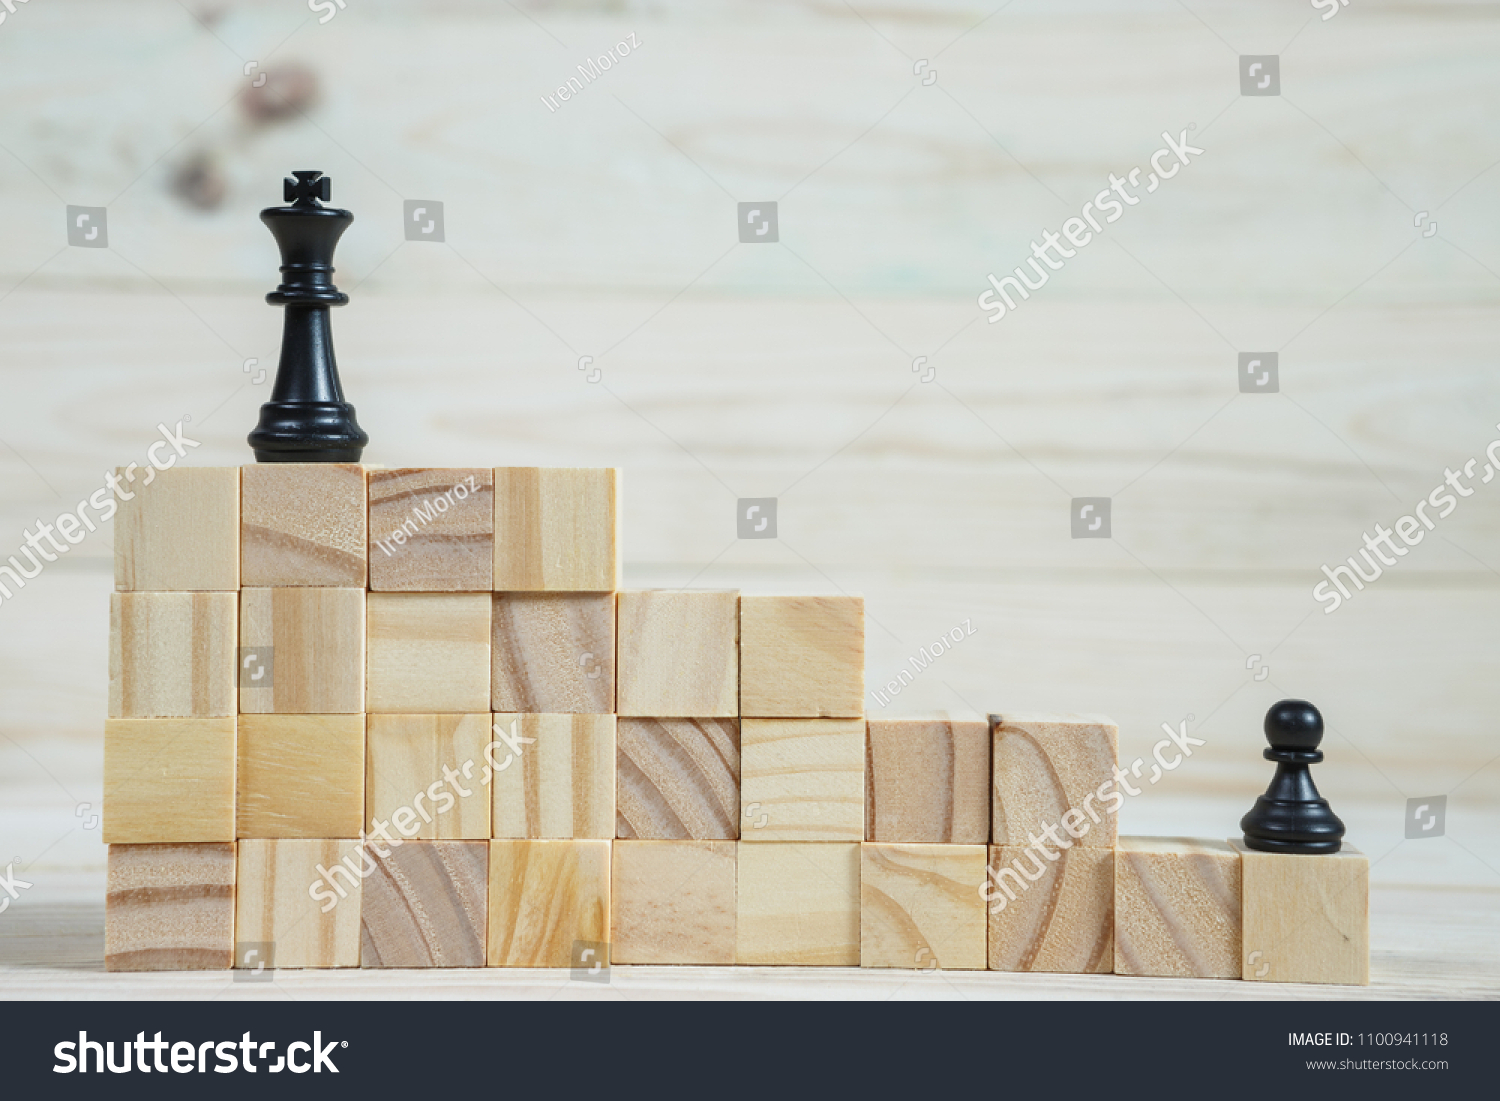 Business hierarchy. Strategy concept with chess pieces. Chess standing on a pyramid of wooden building blocks with the king at the top. copy space. #1100941118